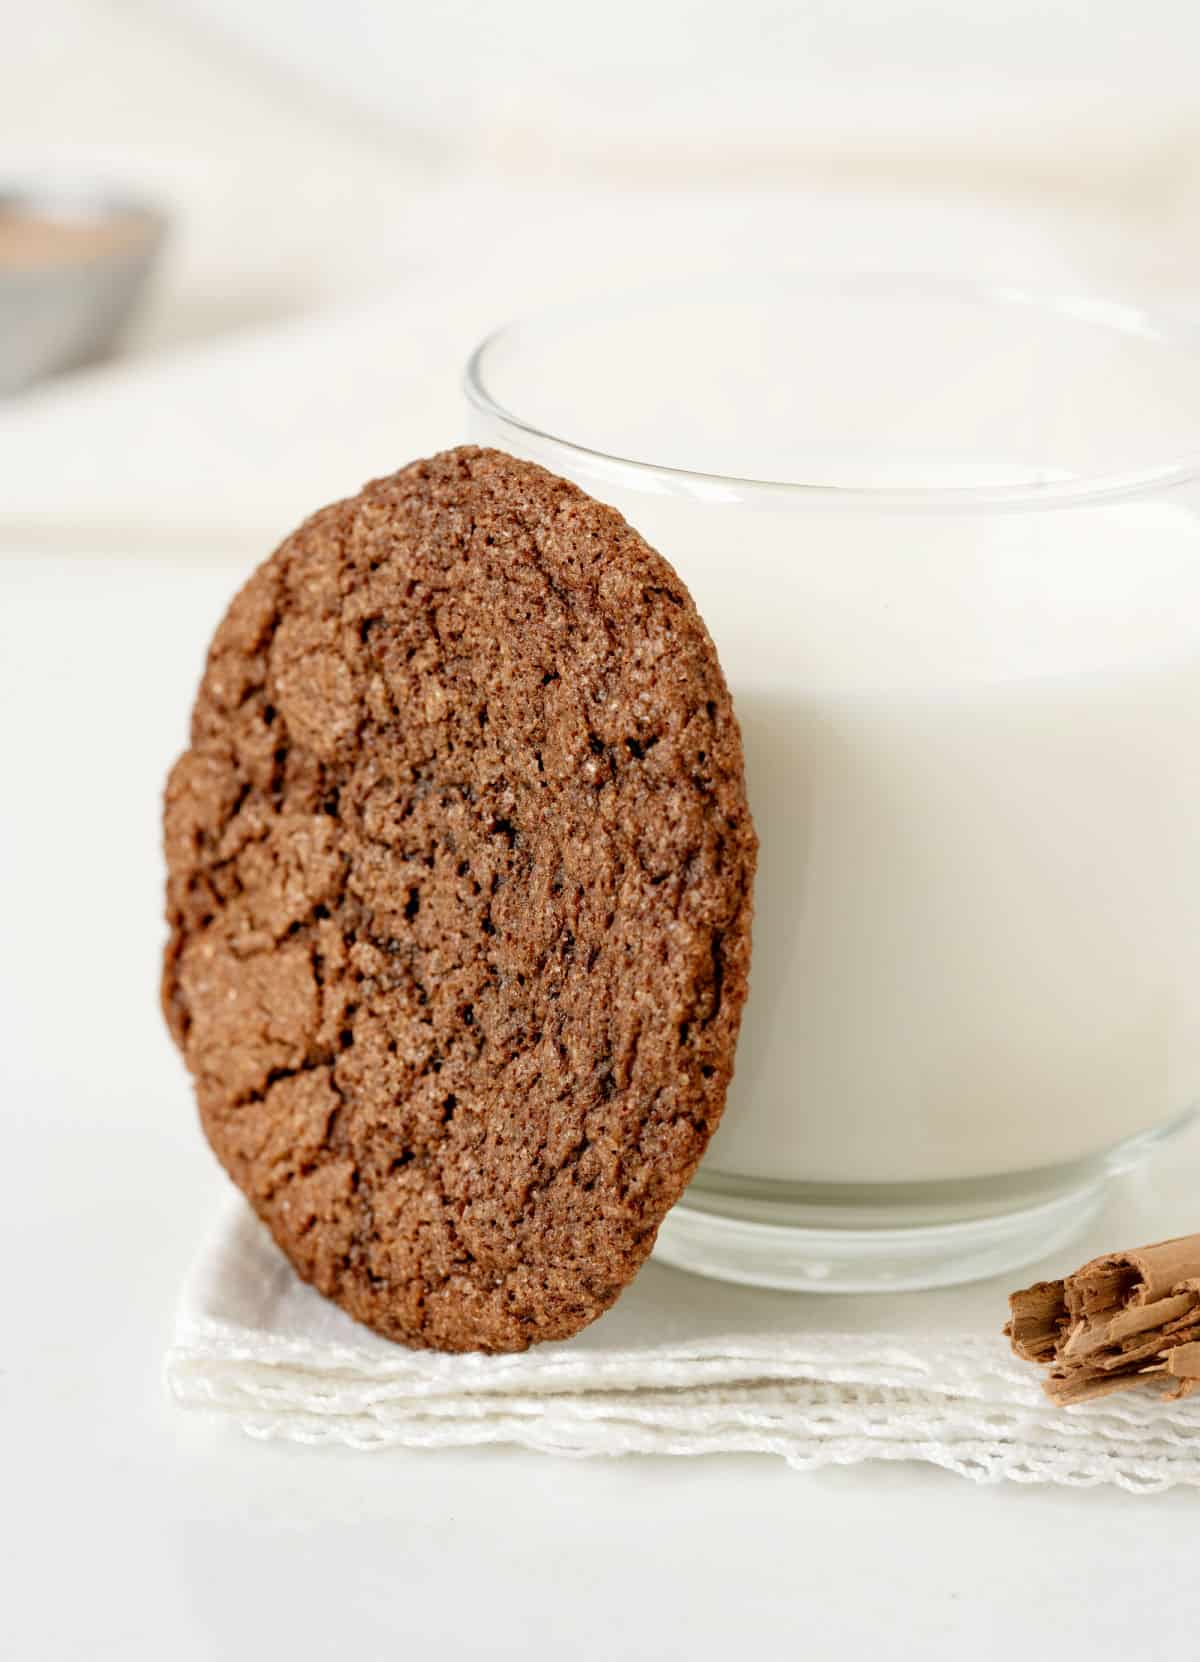 Chocolate cookie leaning on a glass of milk on a white surface.